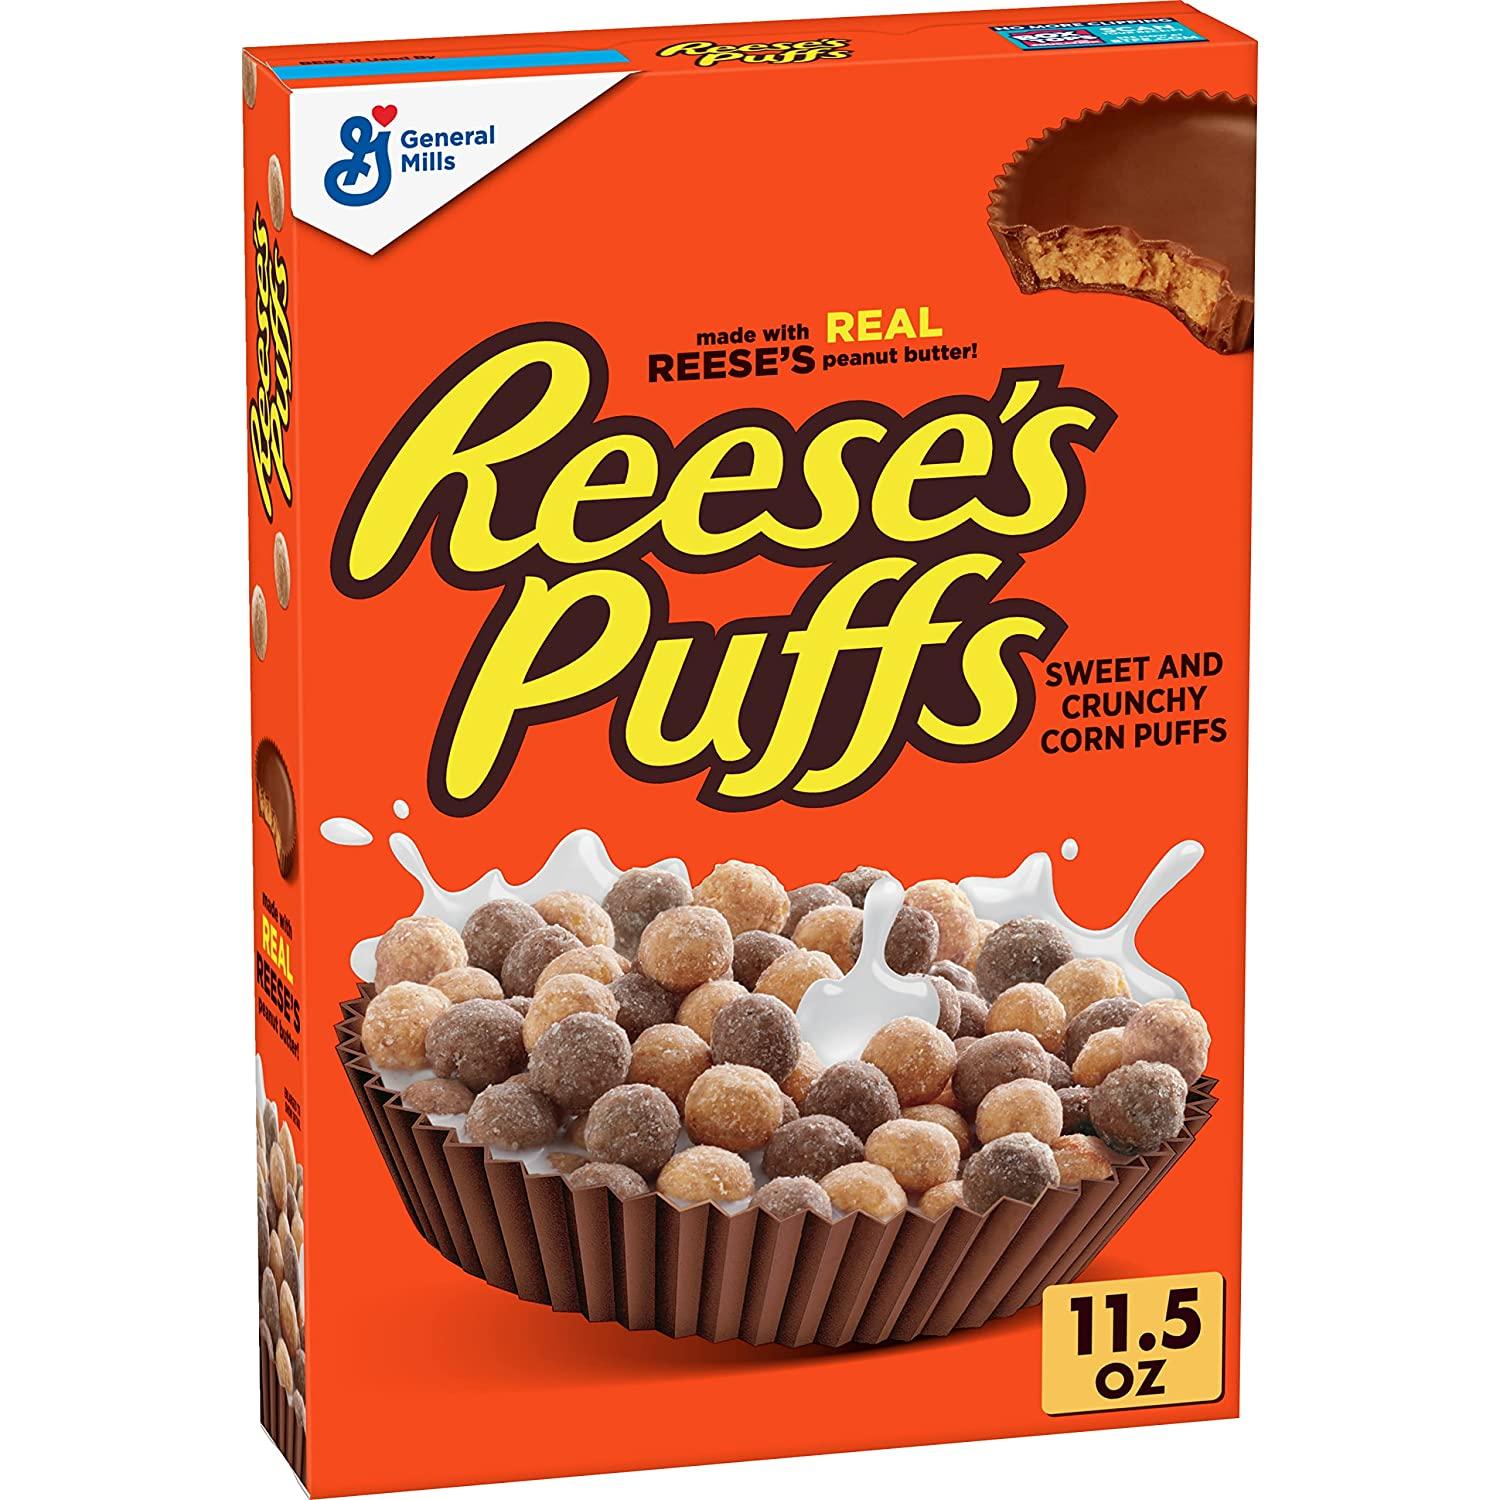 Reese's Puffs Cereal for $1.90 Shipped